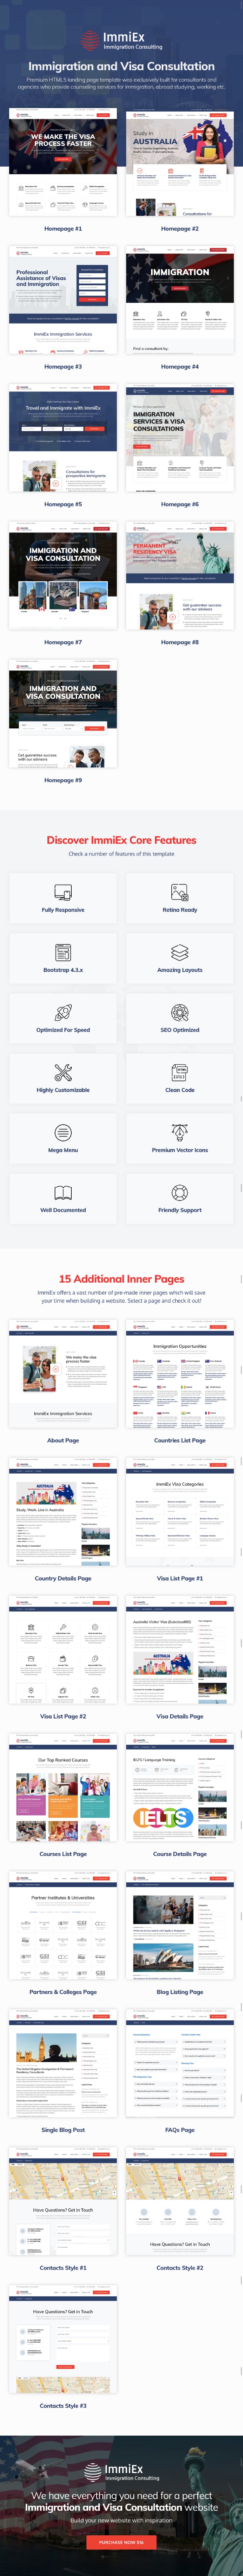 ImmiEx - Immigration and Visa Consulting Website Template - 2